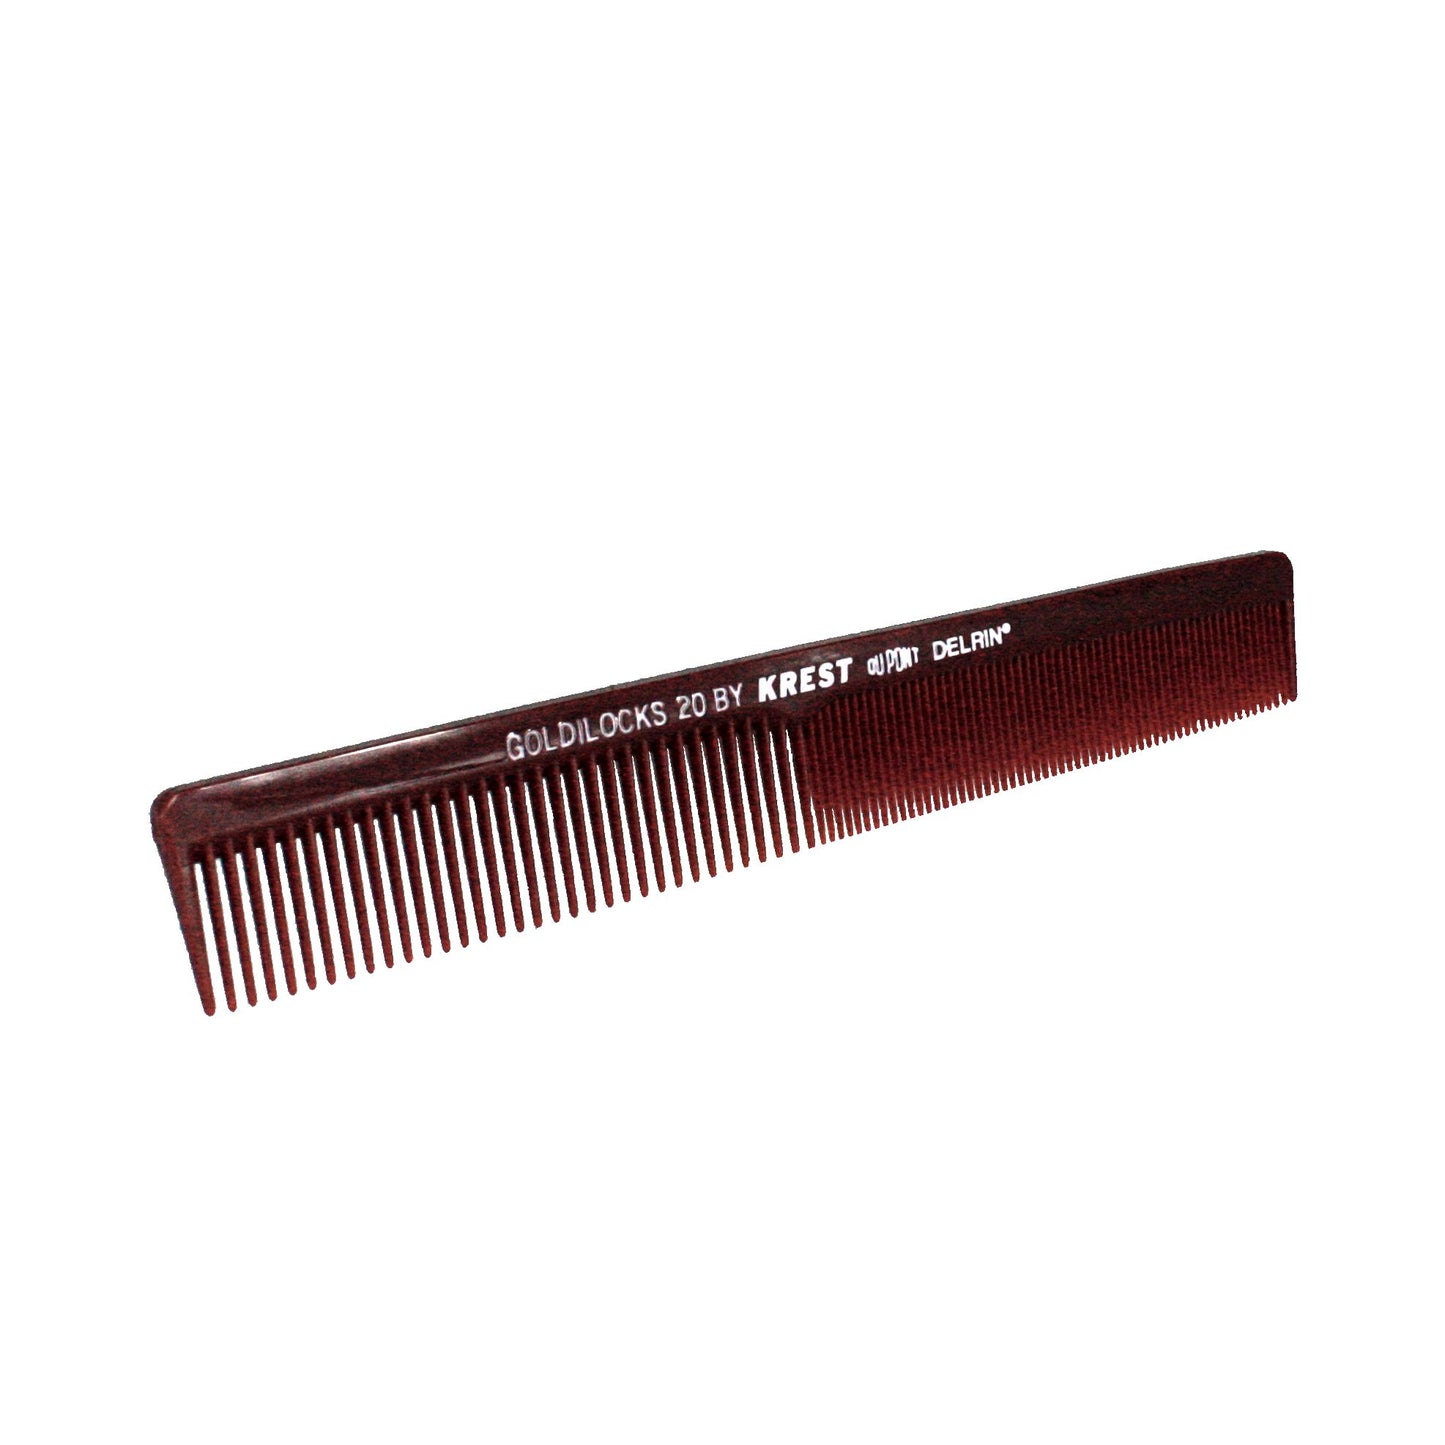 7in, Delrin Plastic, Finger Wave Comb with Inch Marks - CLOSEOUT, LIMITED STOCK AVAILABLE